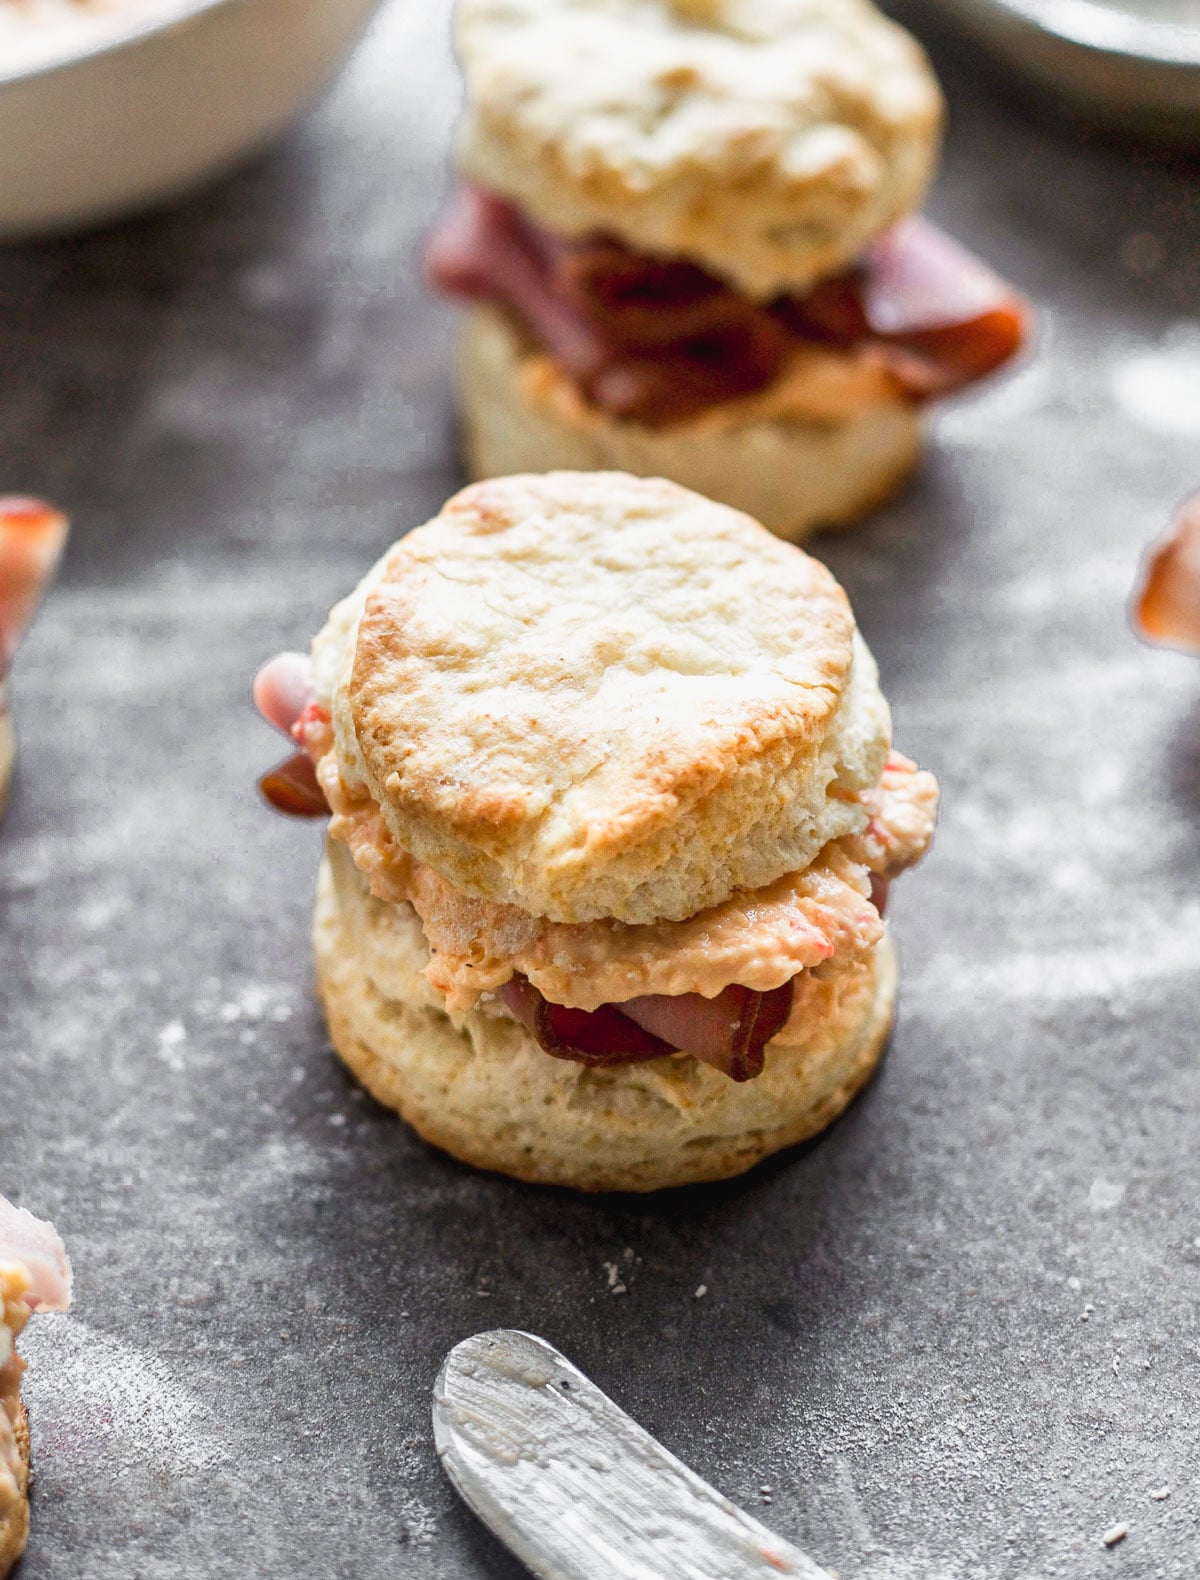 These Ham &amp; Pimento Cheese Sandwiches are simple, but bursting with flavor. We take our favorite biscuit recipe that's light, flaky, and oh-so delicious and smother the inside with warm pimento cheese and ham. The perfect bridal shower, lunch or side to soup or salad.